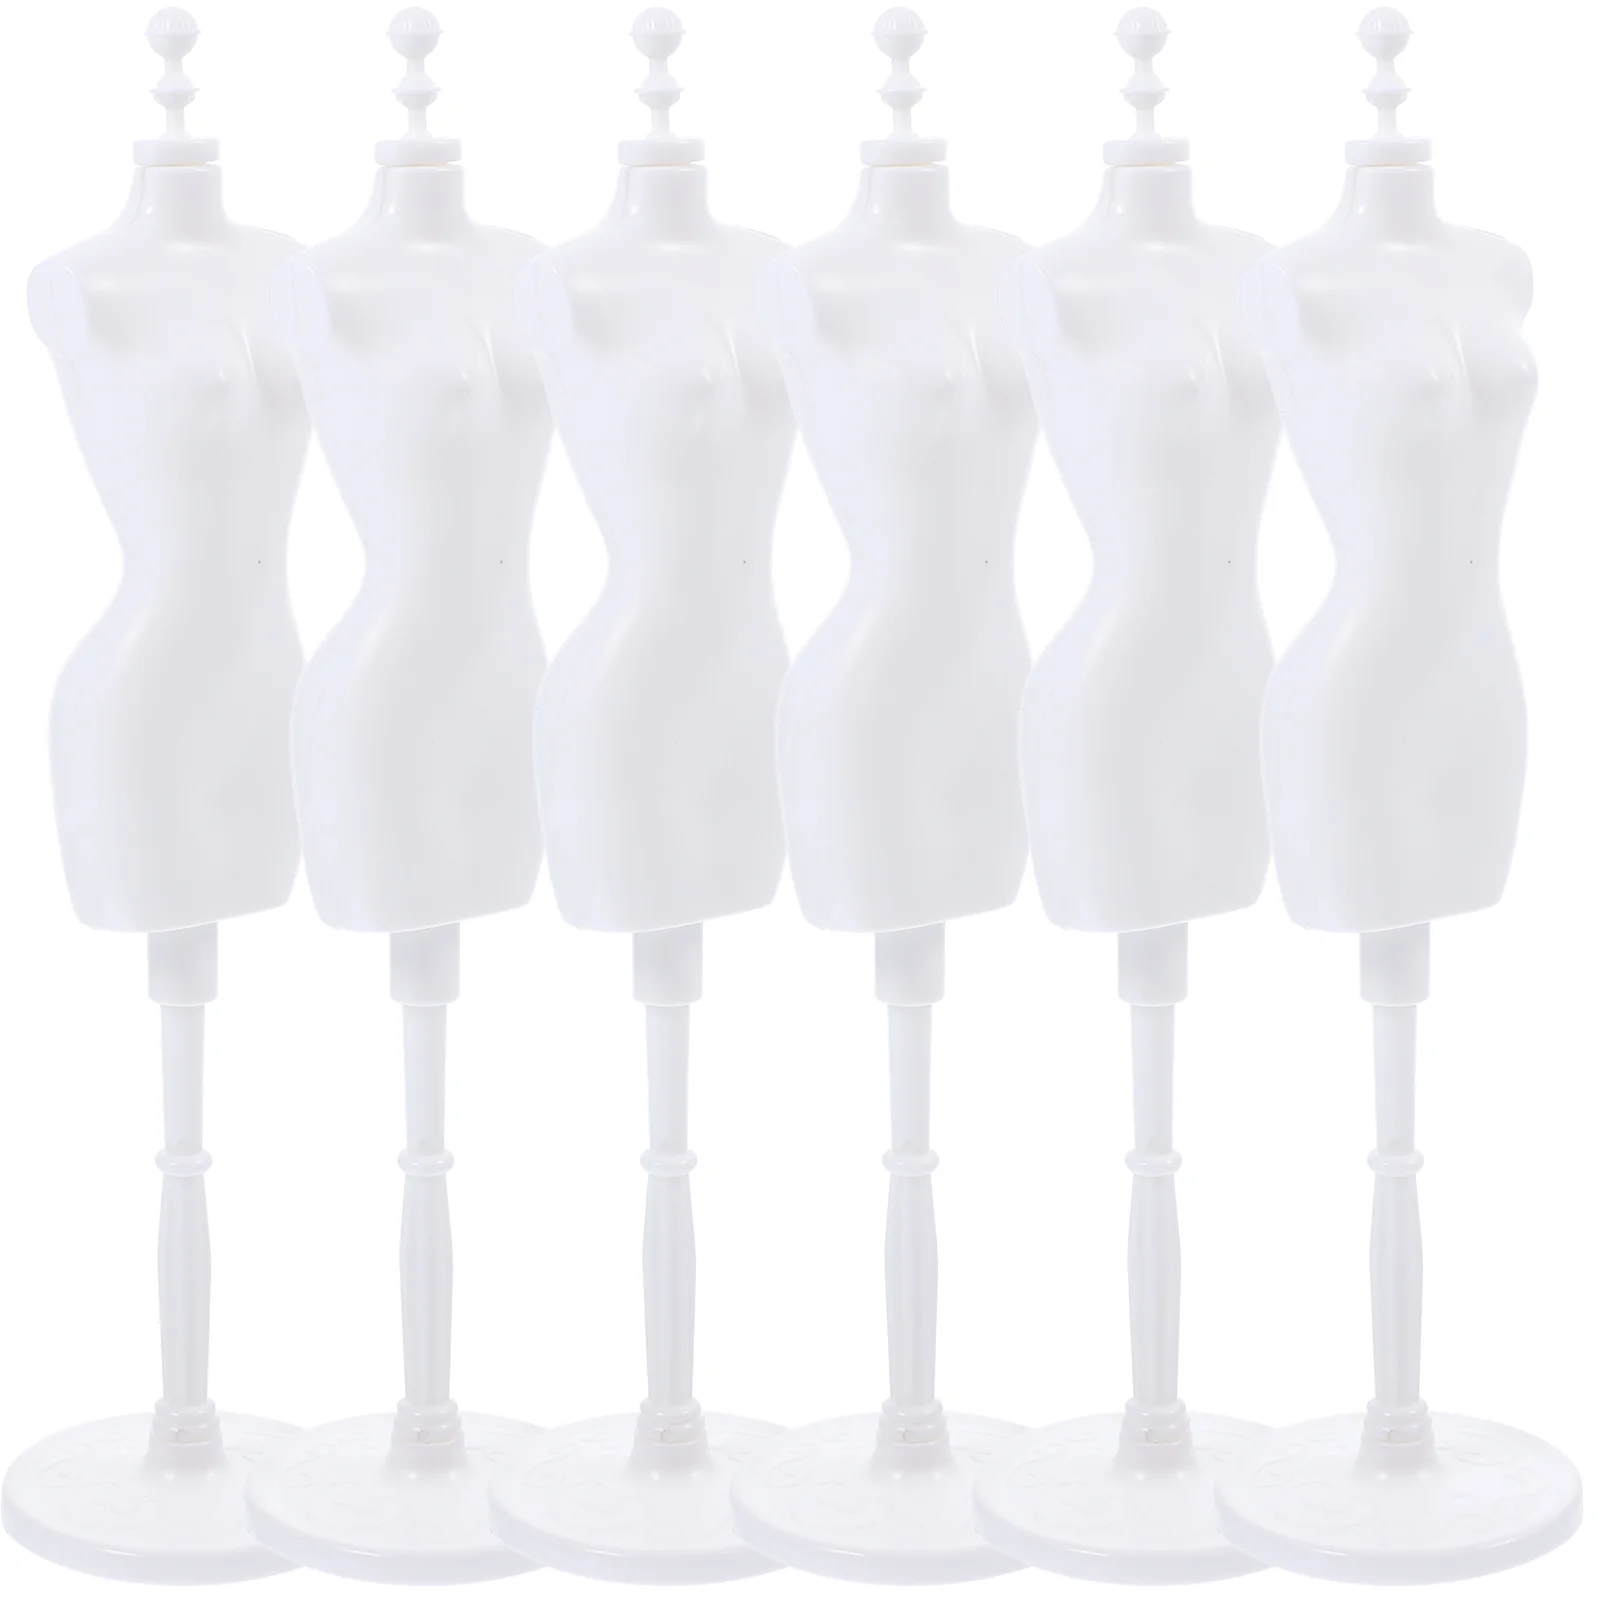 

6 Pcs Hangers Miniature Dress Form Toys Dolls Mannequin Stand Cloth Clothes Display Holder Skirts Clothing Rack